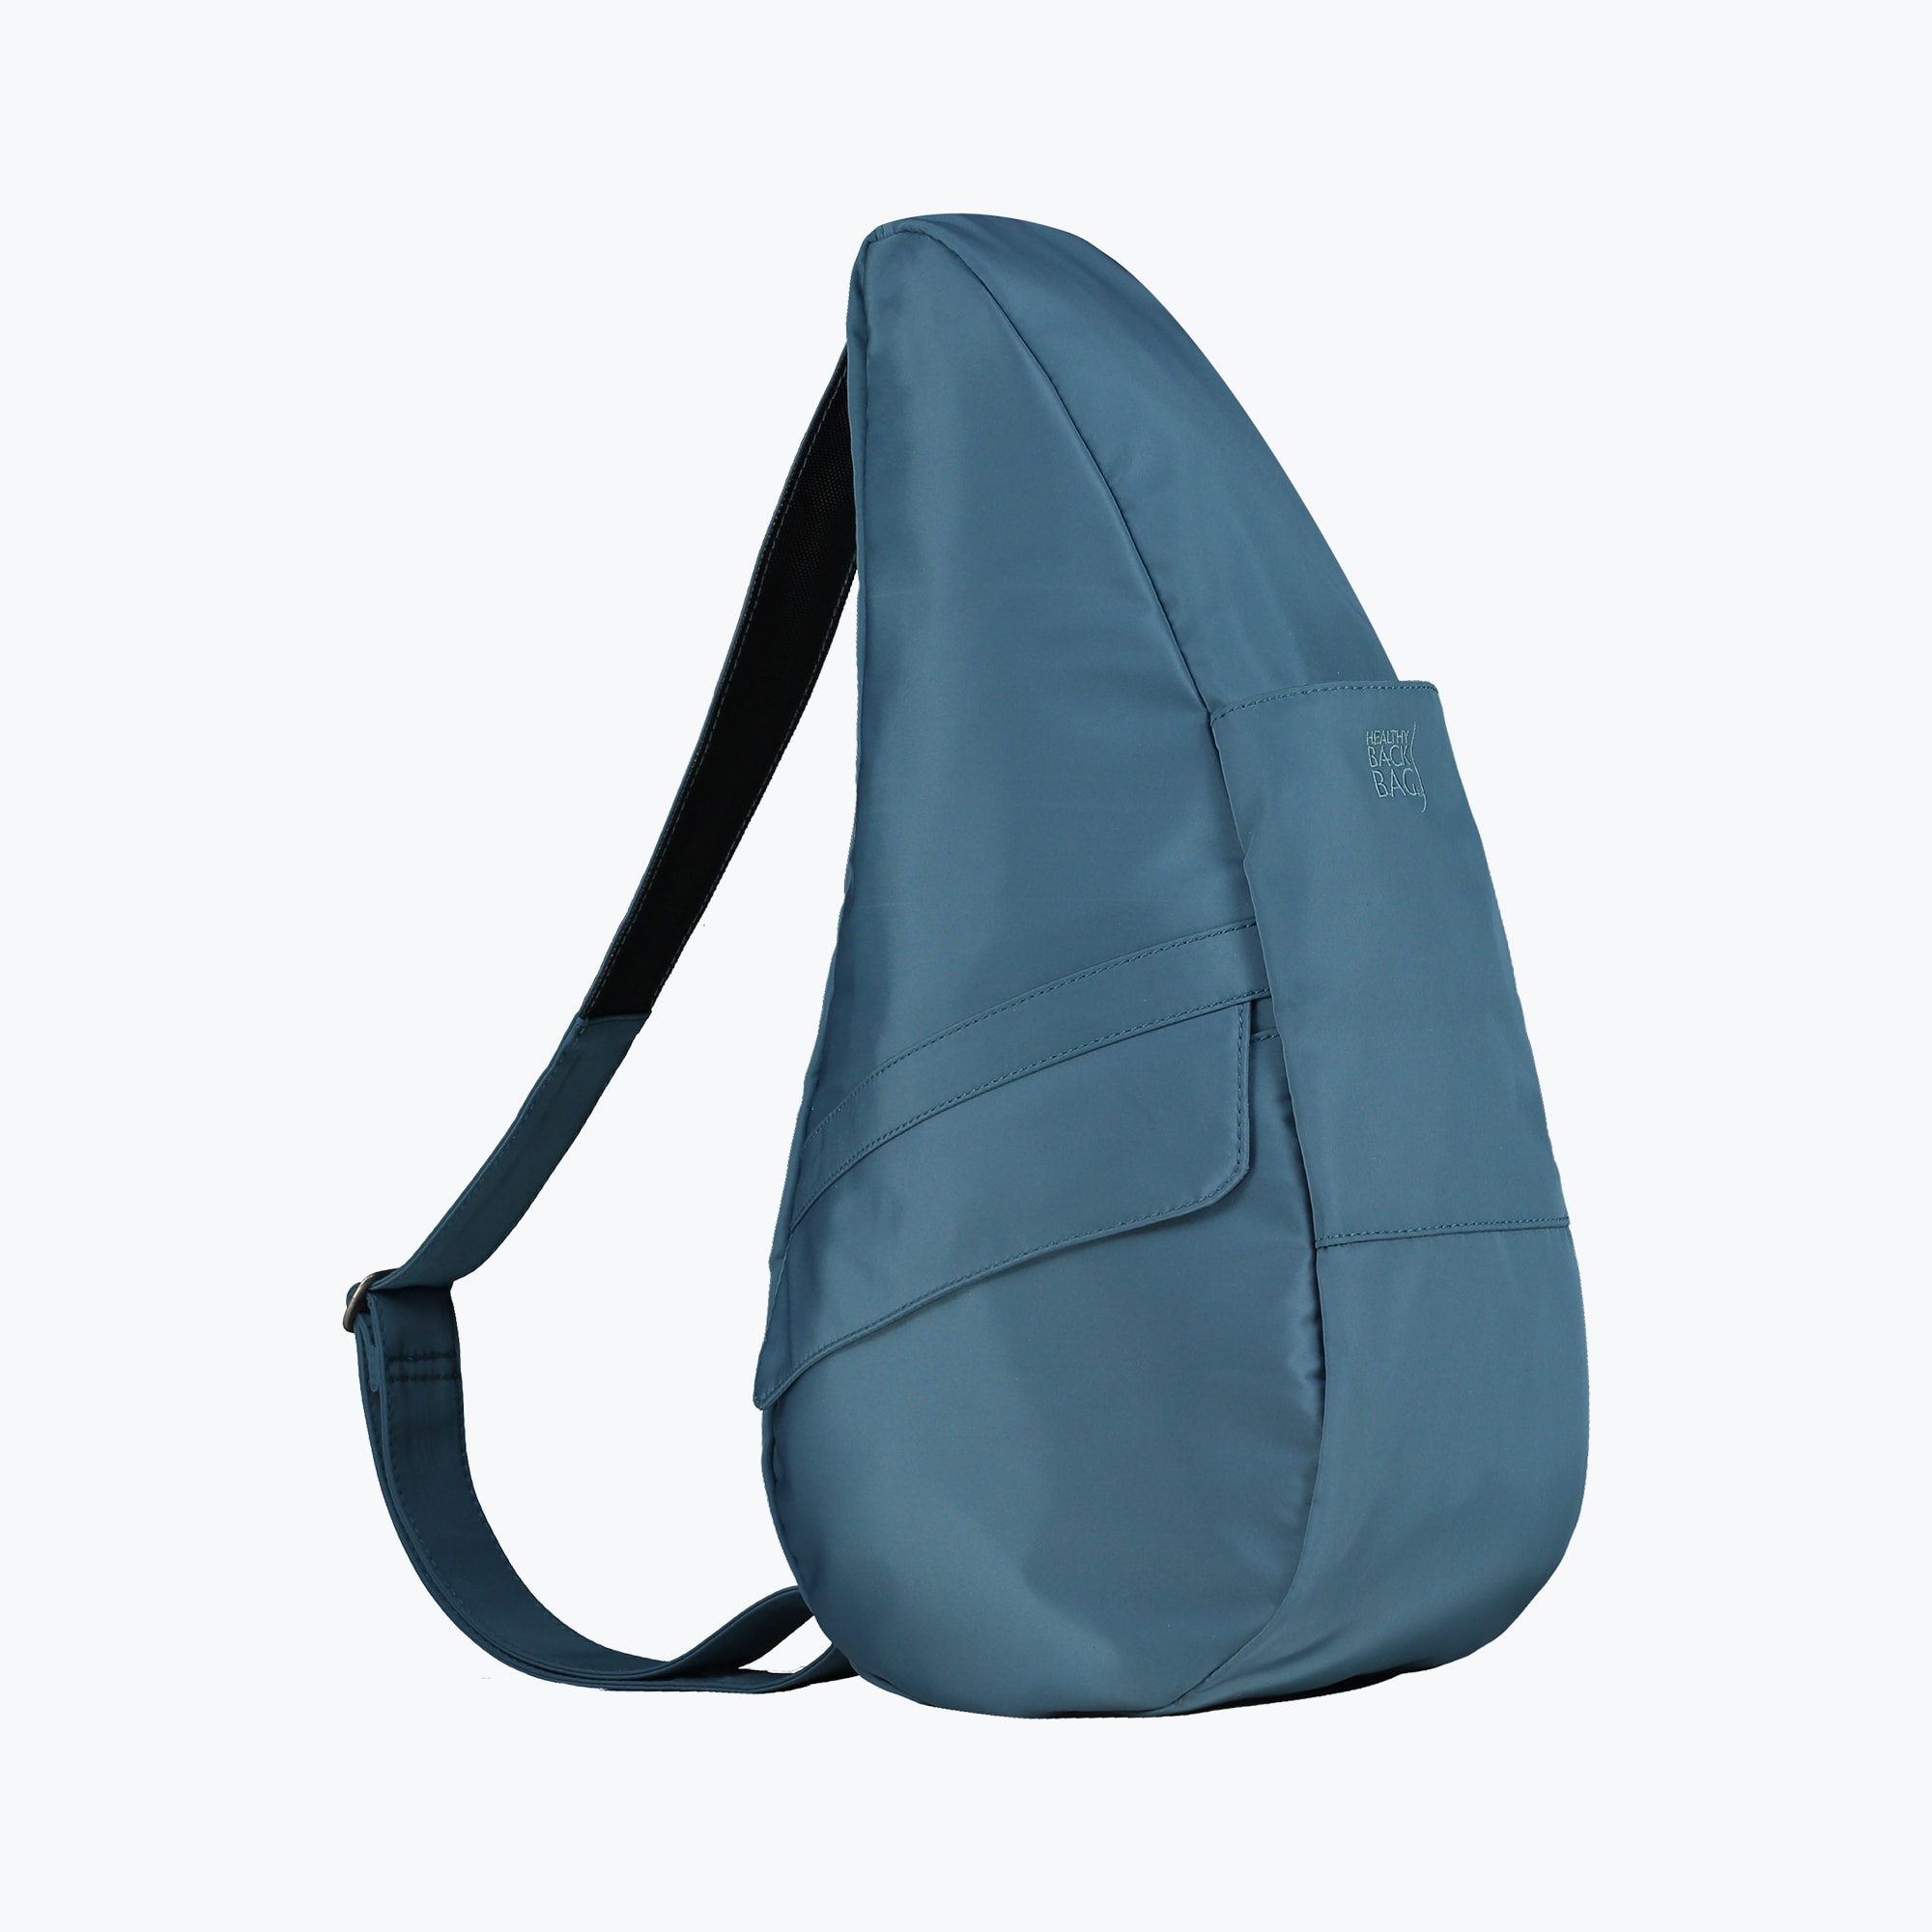 Shop All Products at The Healthy Back Bag